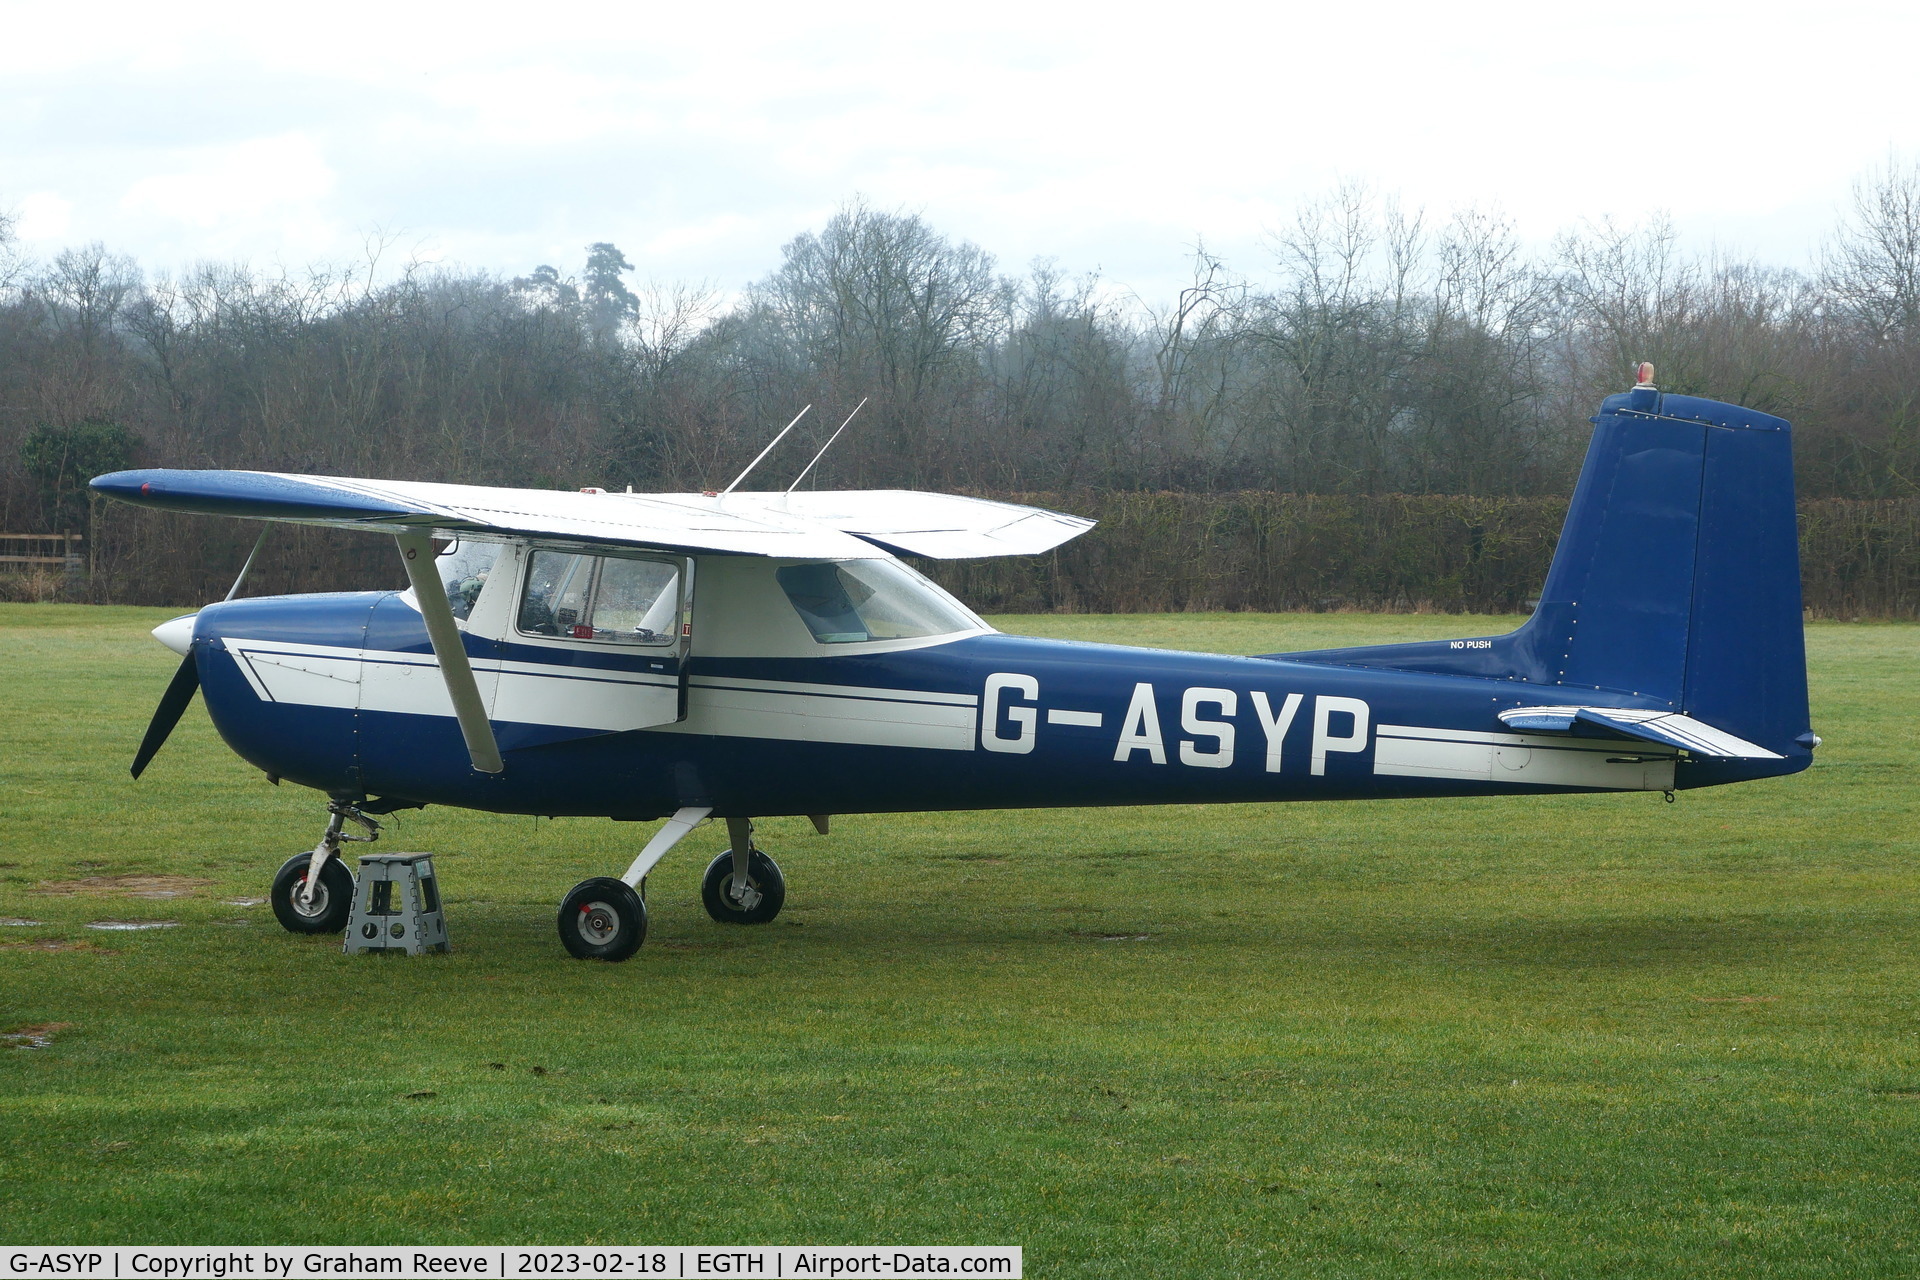 G-ASYP, 1964 Cessna 150E C/N 150-60794, Parked at Old Warden.